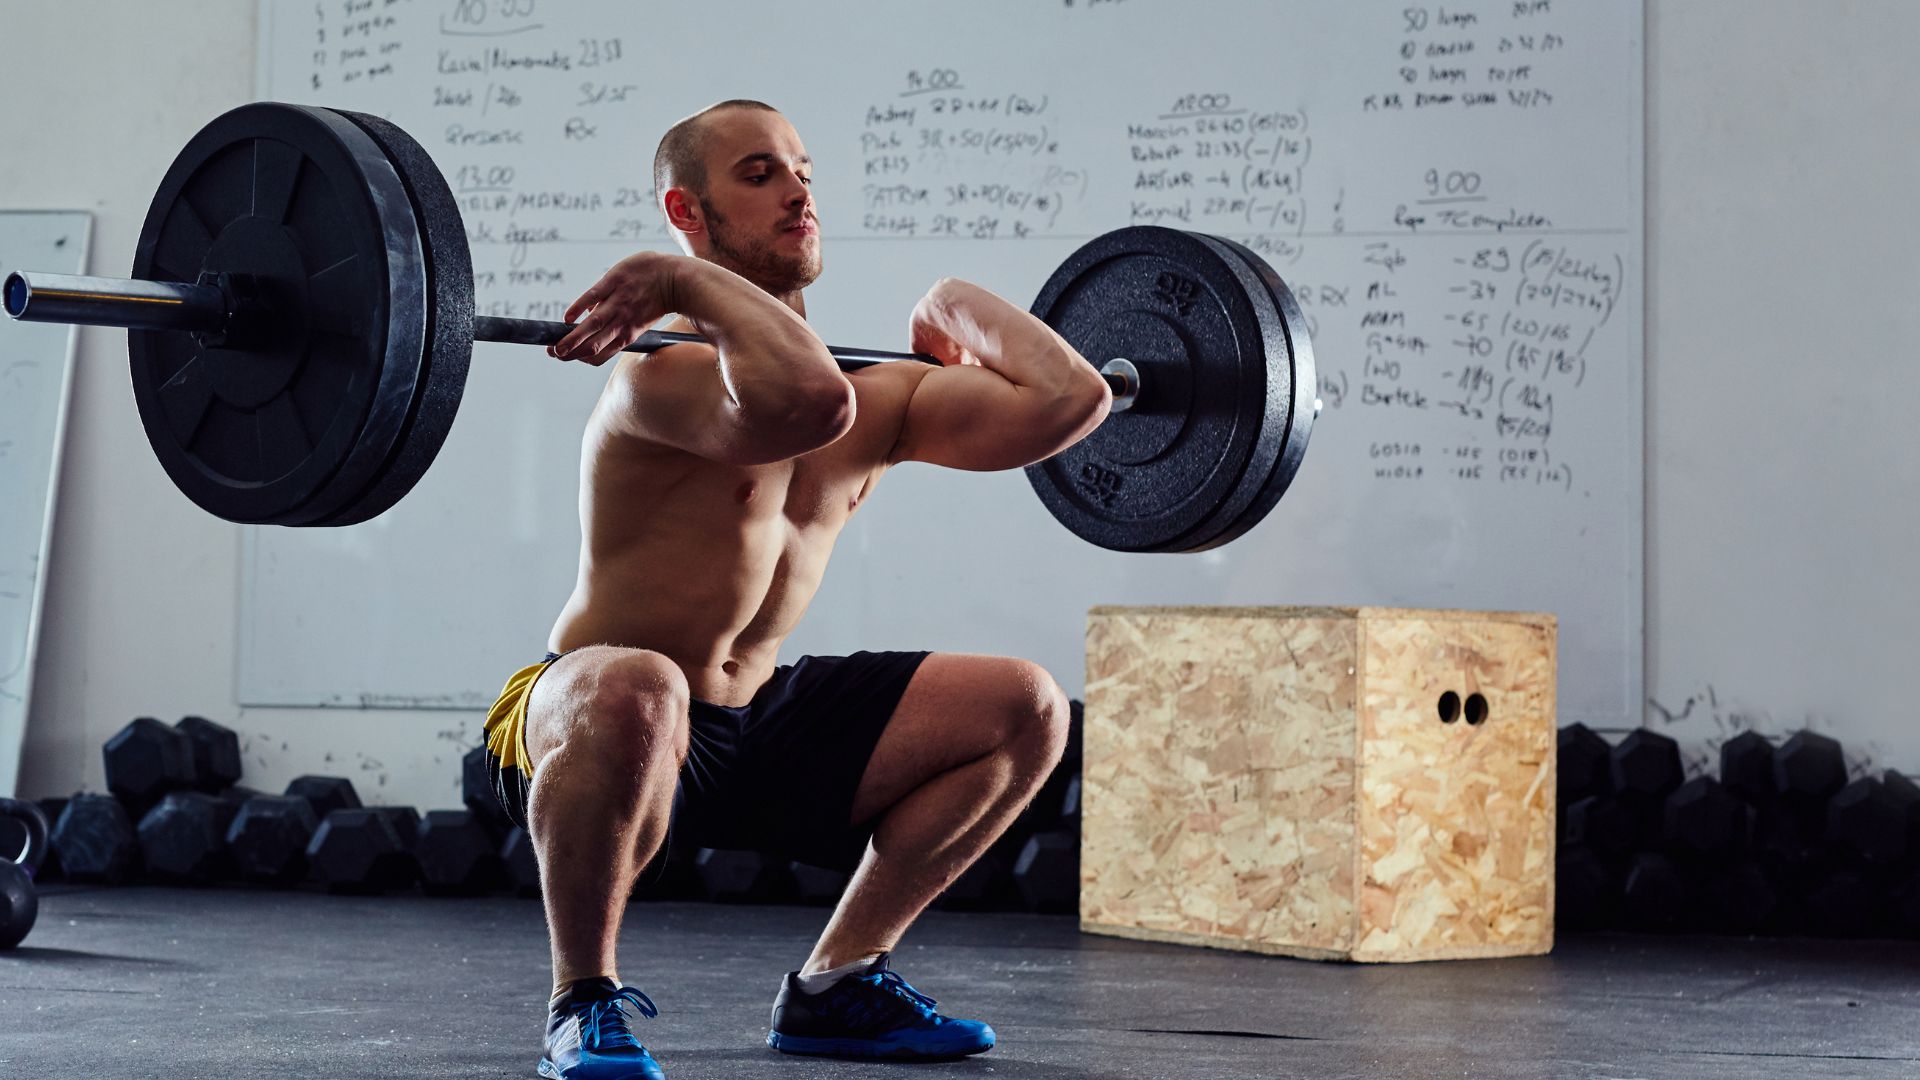 Barbell front squat exercise jn